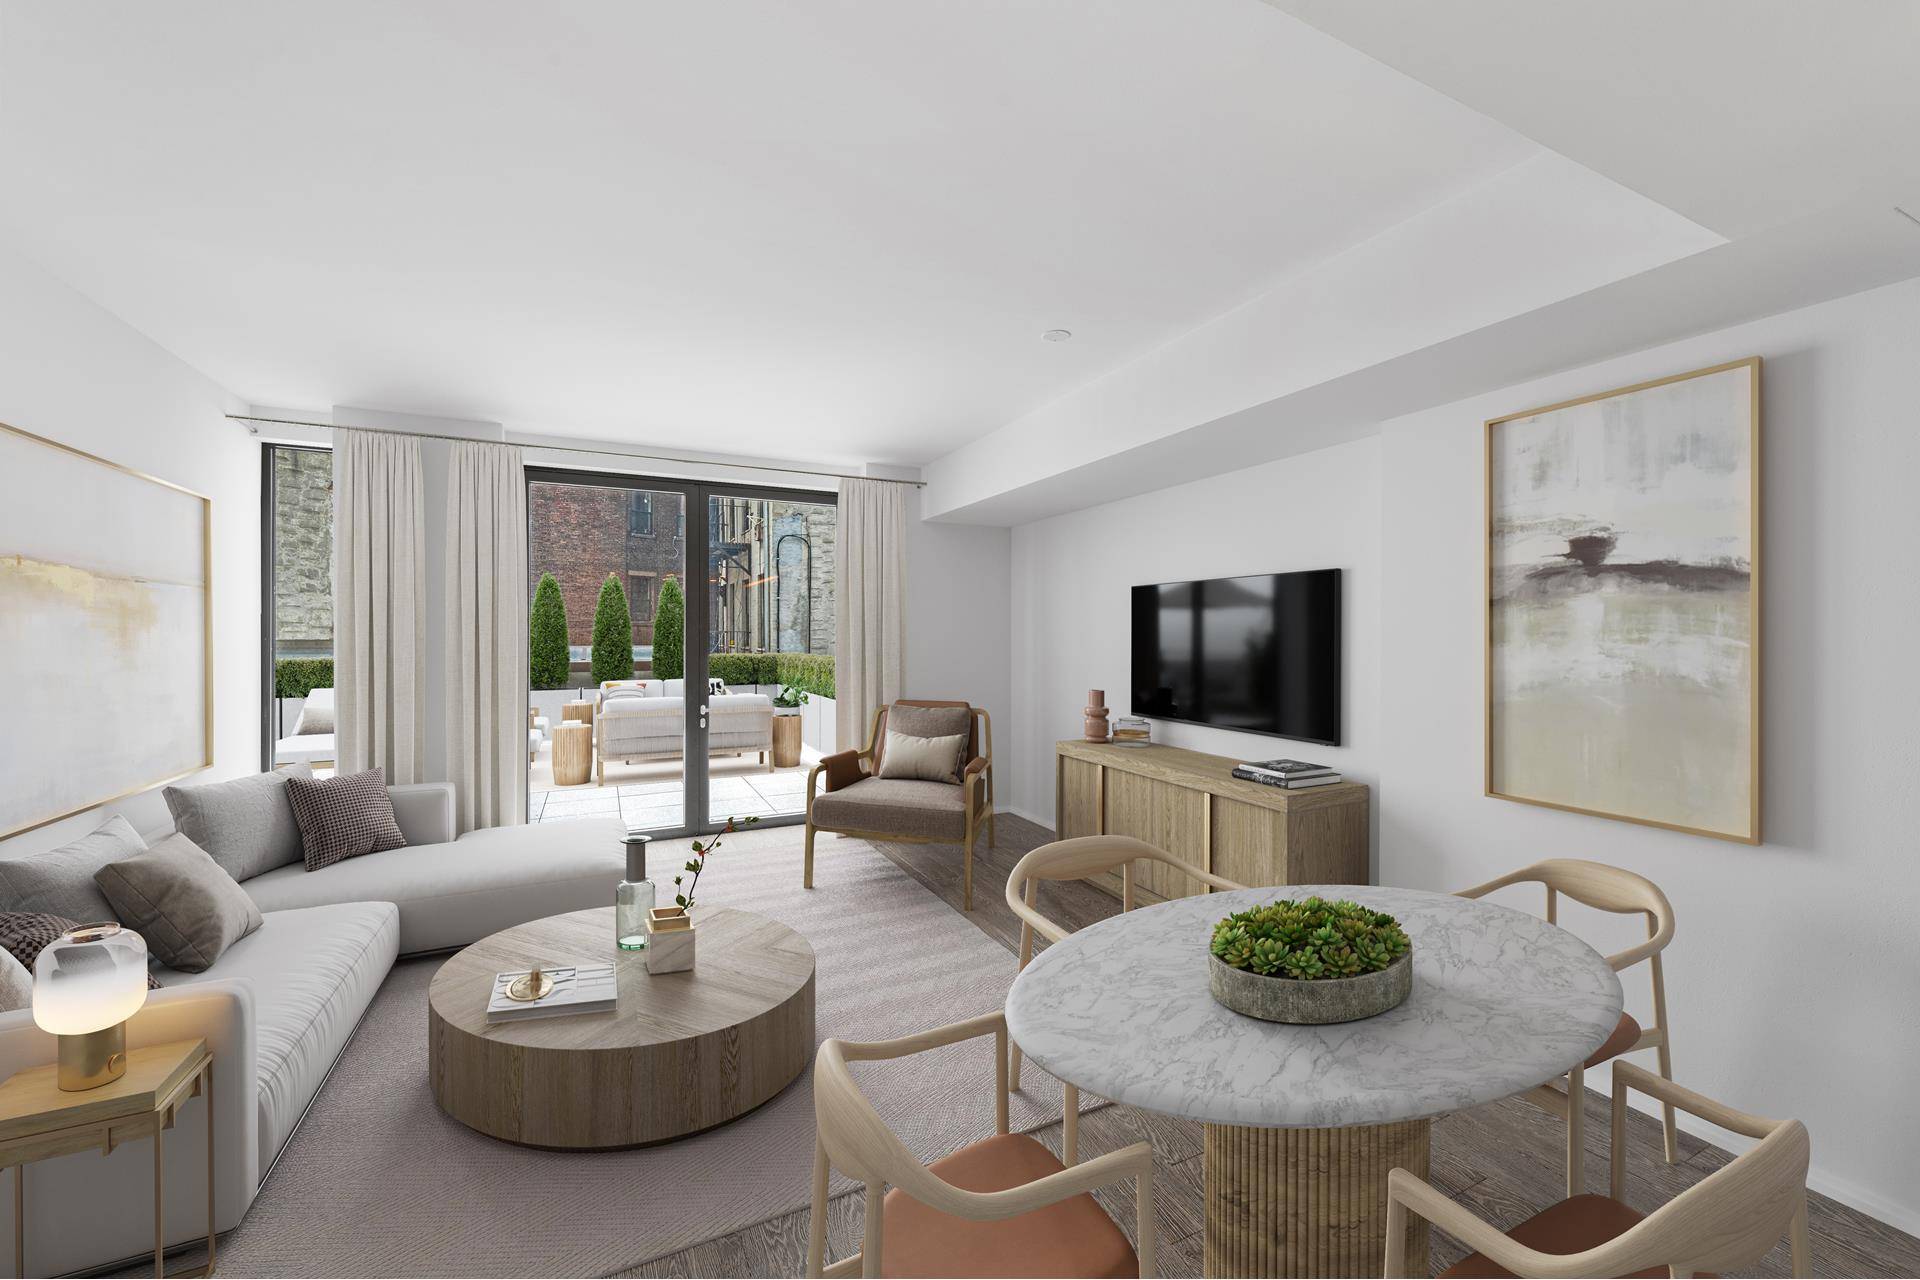 Immediate Occupancy ! Designed by world renowned architect, Thomas Juul Hansen, 199 Chrystie Street presents 14 beautifully crafted interlocking villas that evoke striking architectural design yet remain refined through the ...